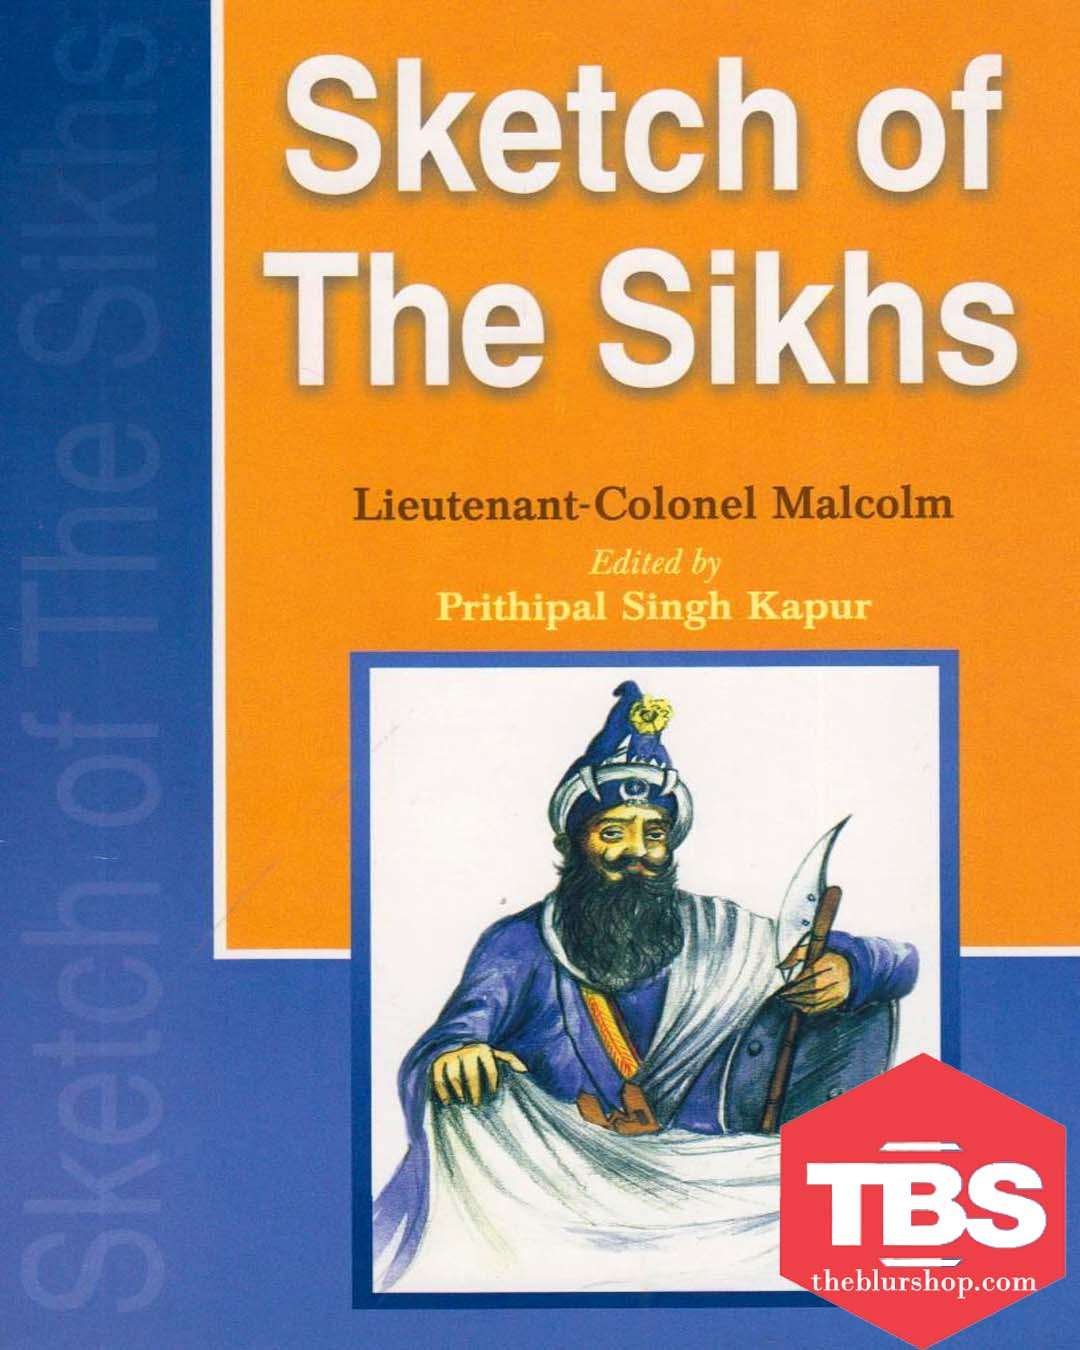 Sketch of The Sikhs